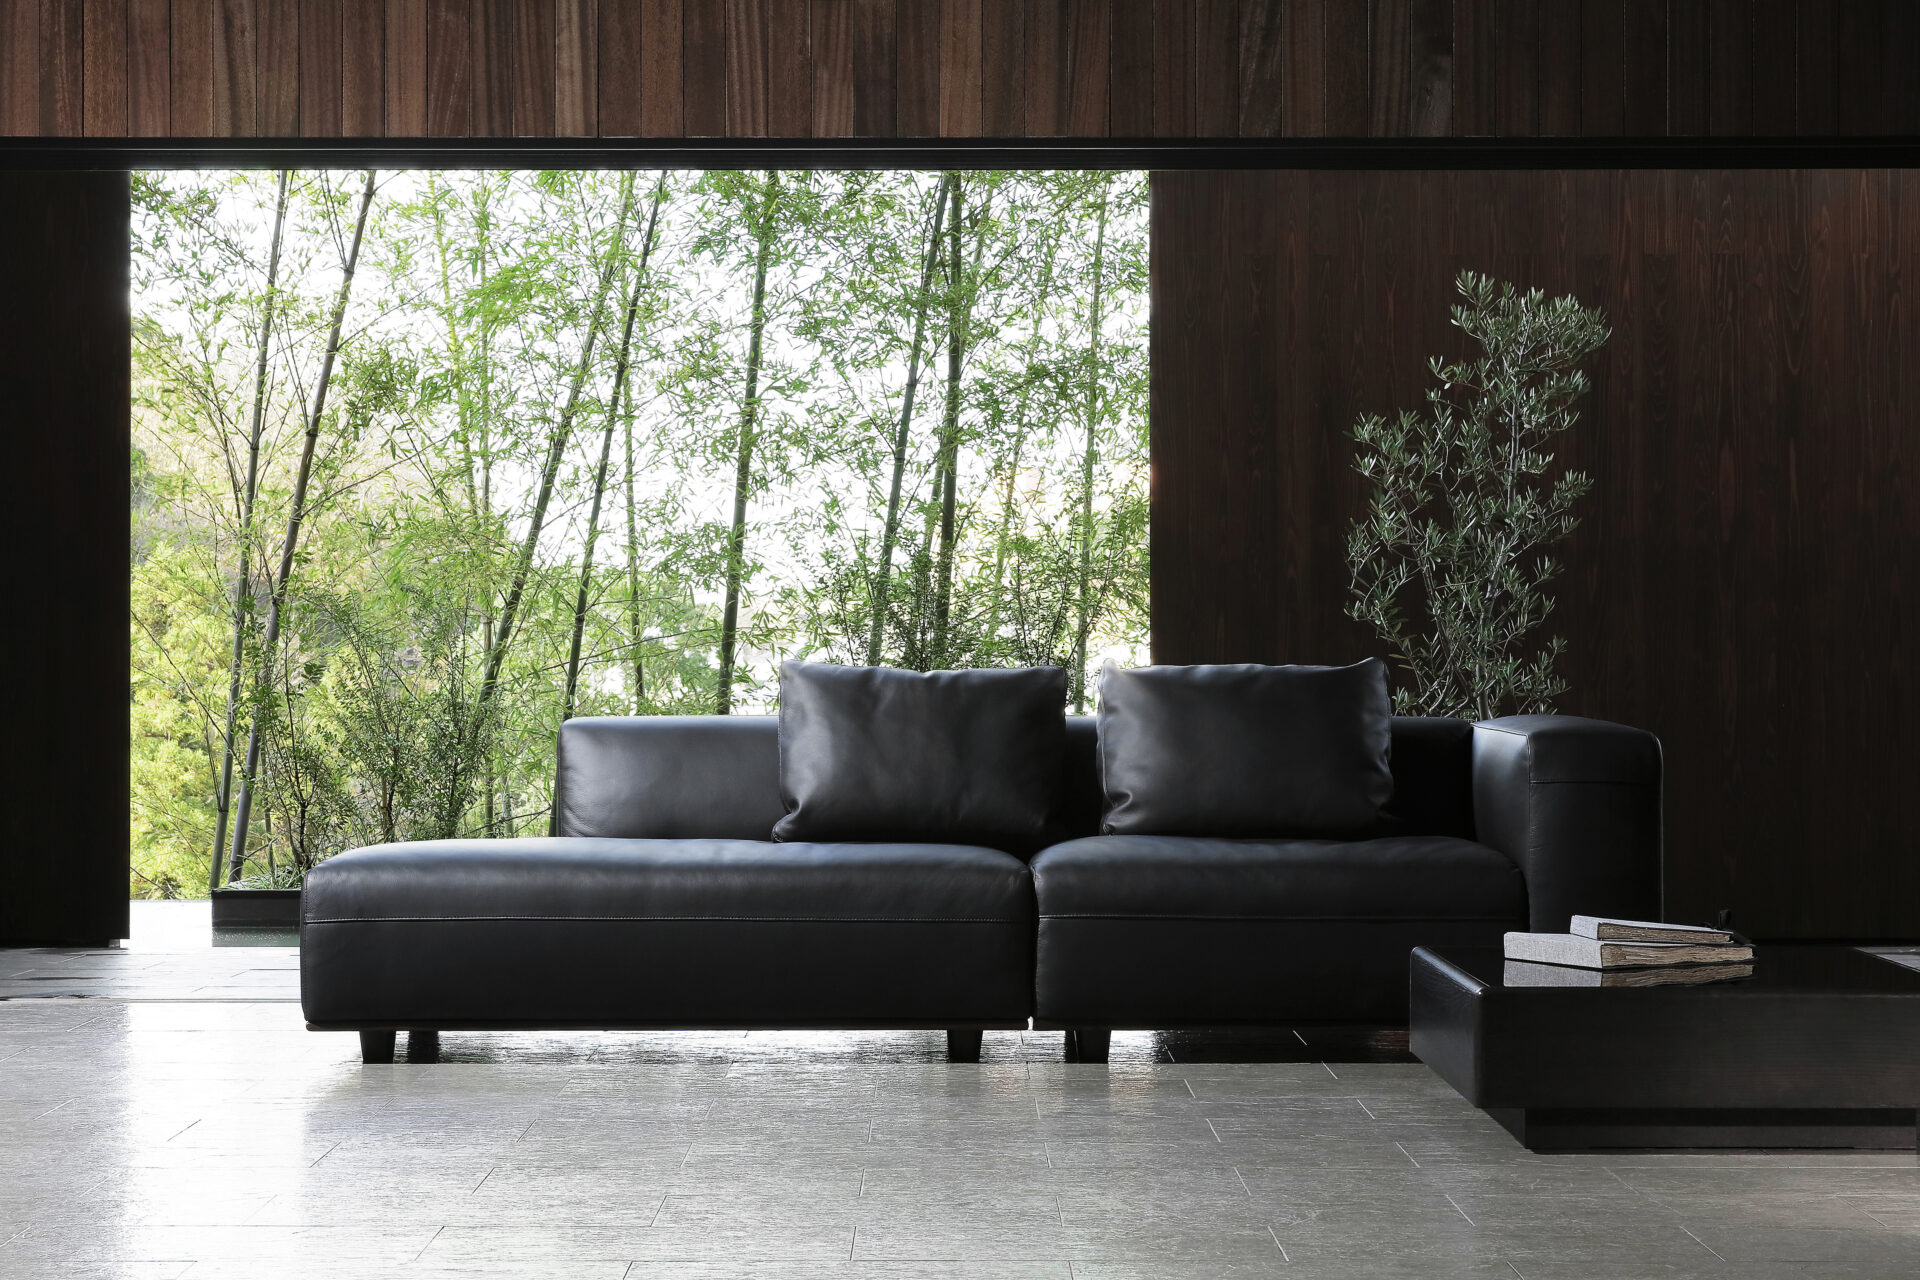 OFFICIAL PRESENT LIMITED DURA SOFA TO THE VIETNAM MARKET